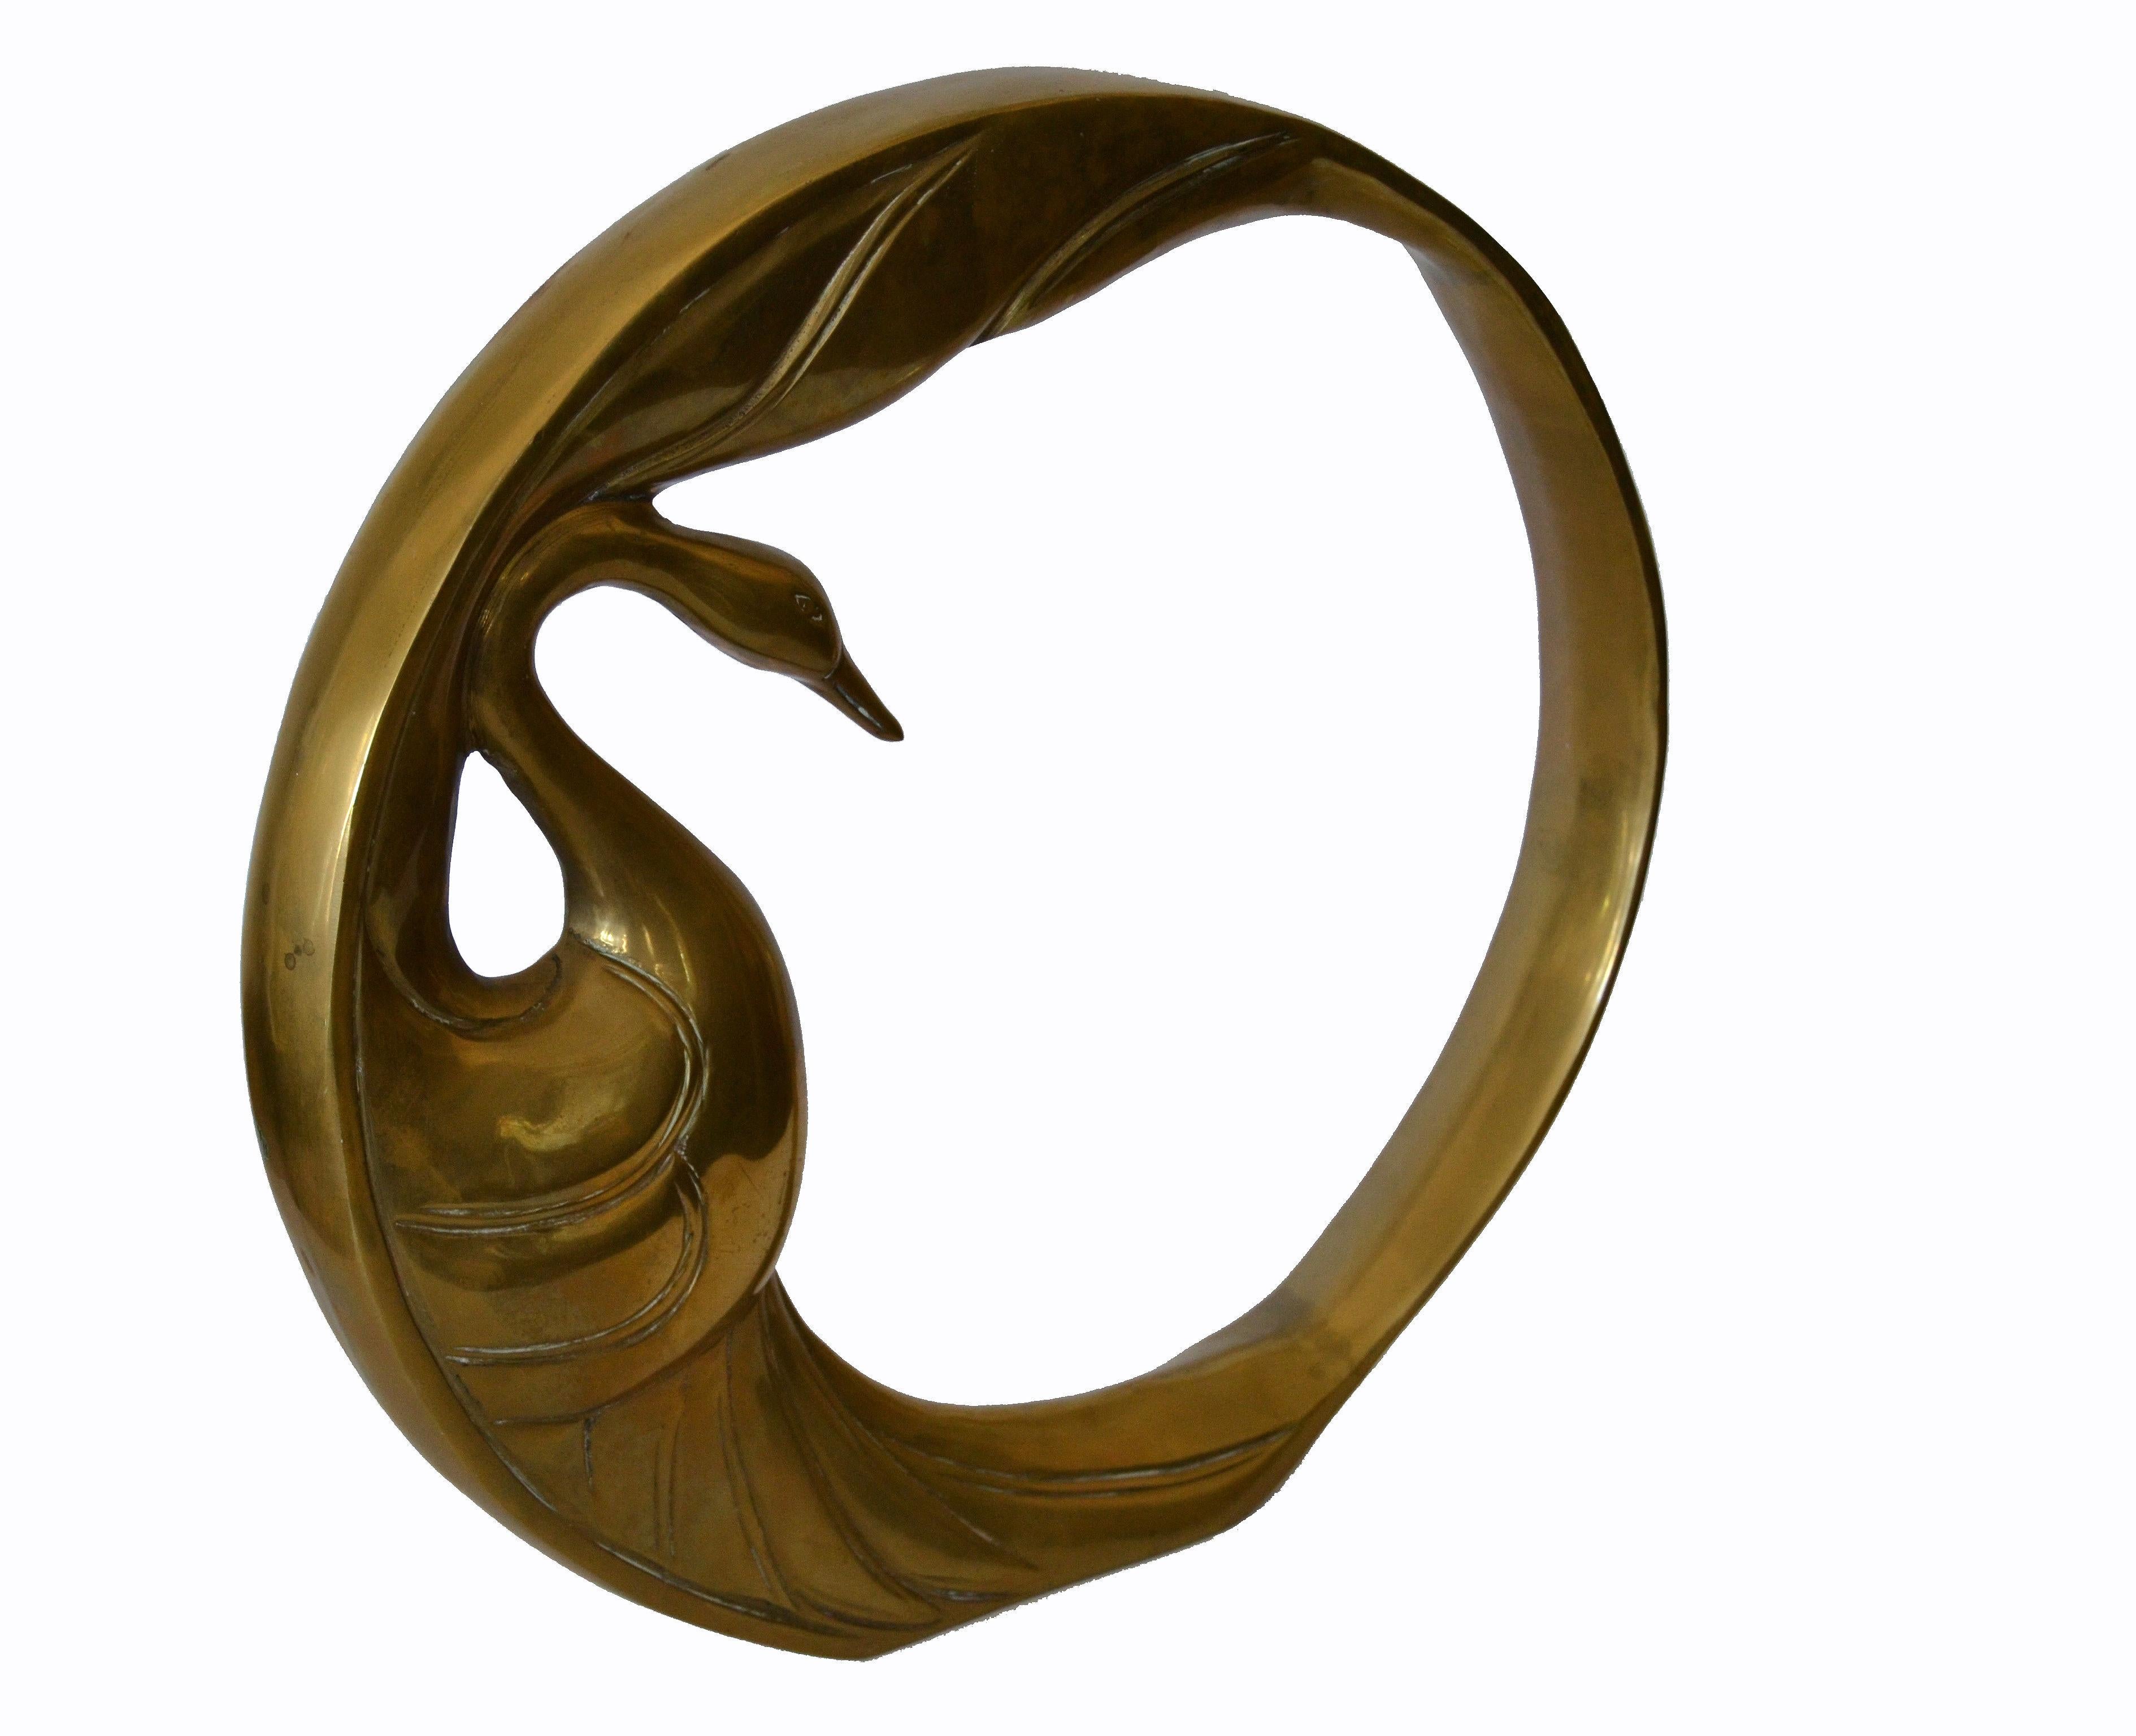 20th Century Mid-Century Modern Bronze Golden Swan Ring Table Sculpture by Dolbi Cashier 1984 For Sale